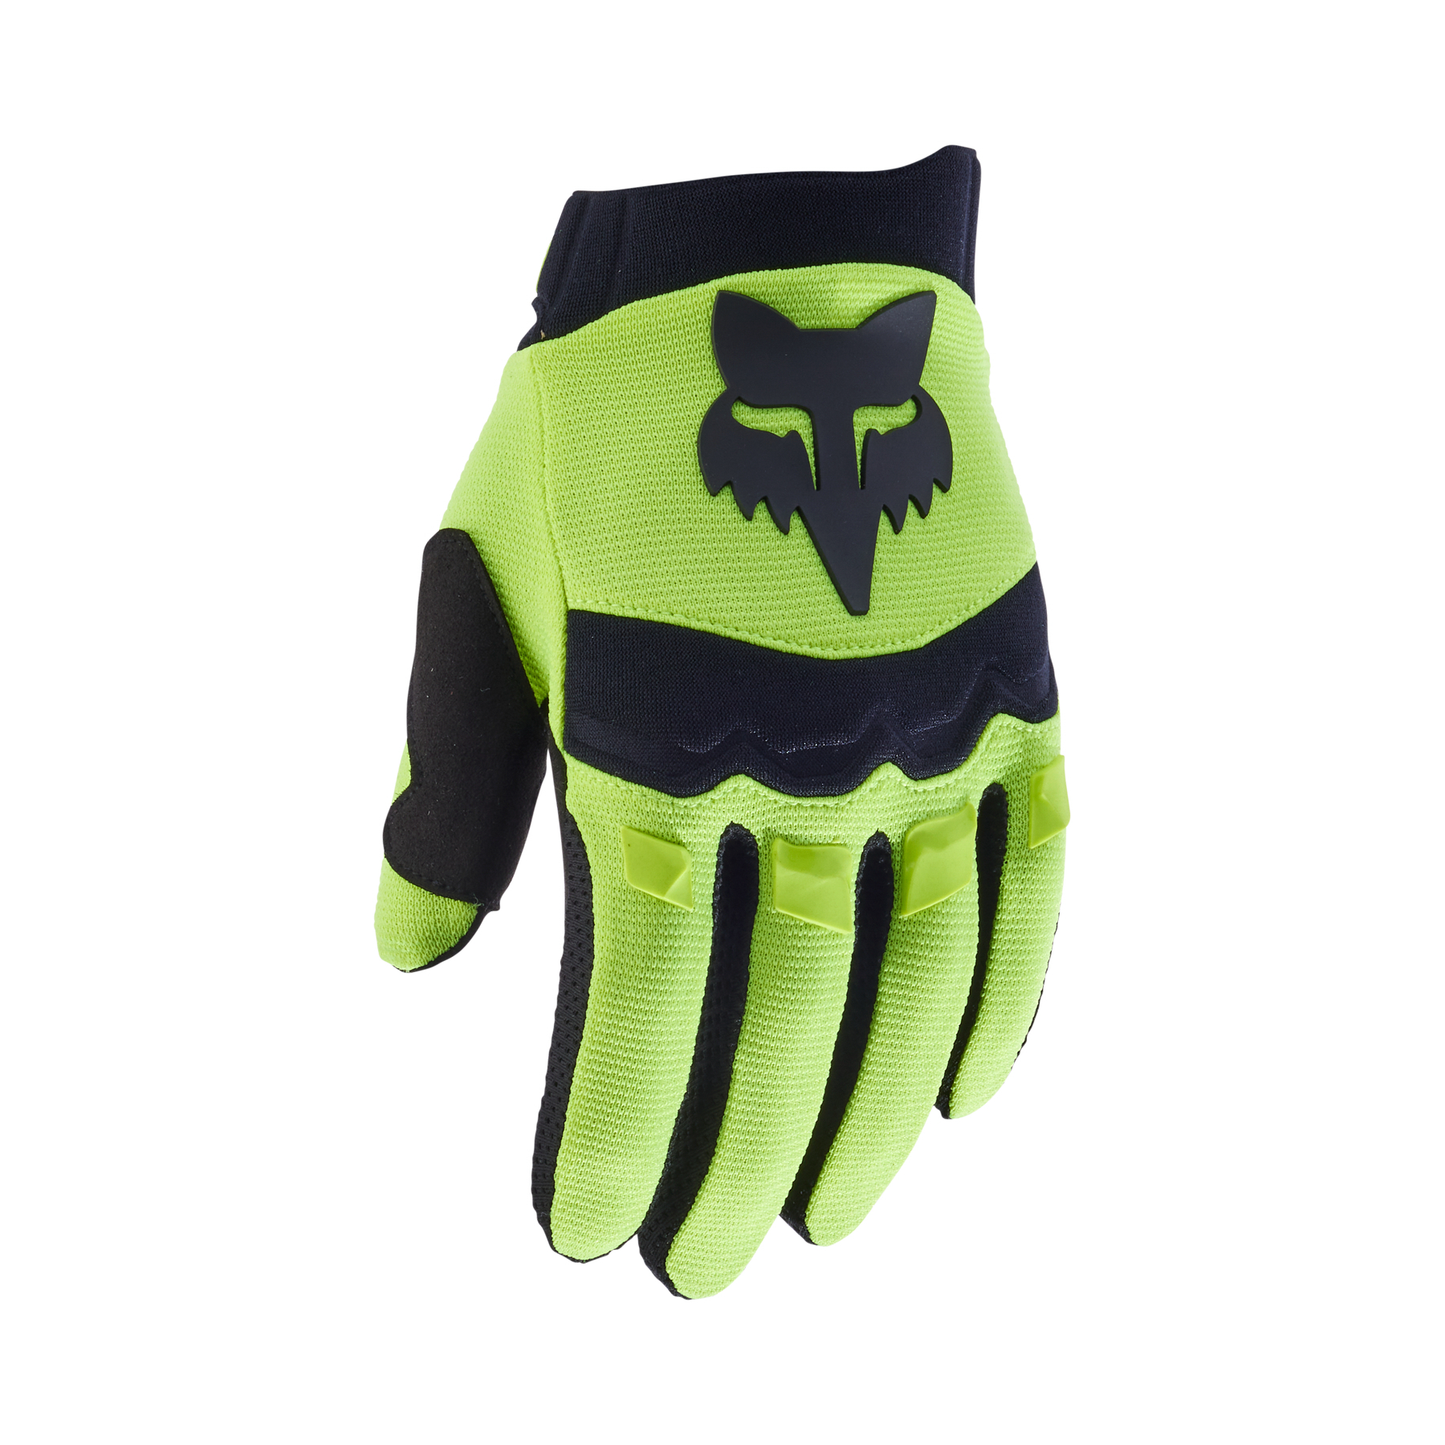 Fox Dirtpaw Youth Gloves - Youth L - Flo Yellow - Image 1